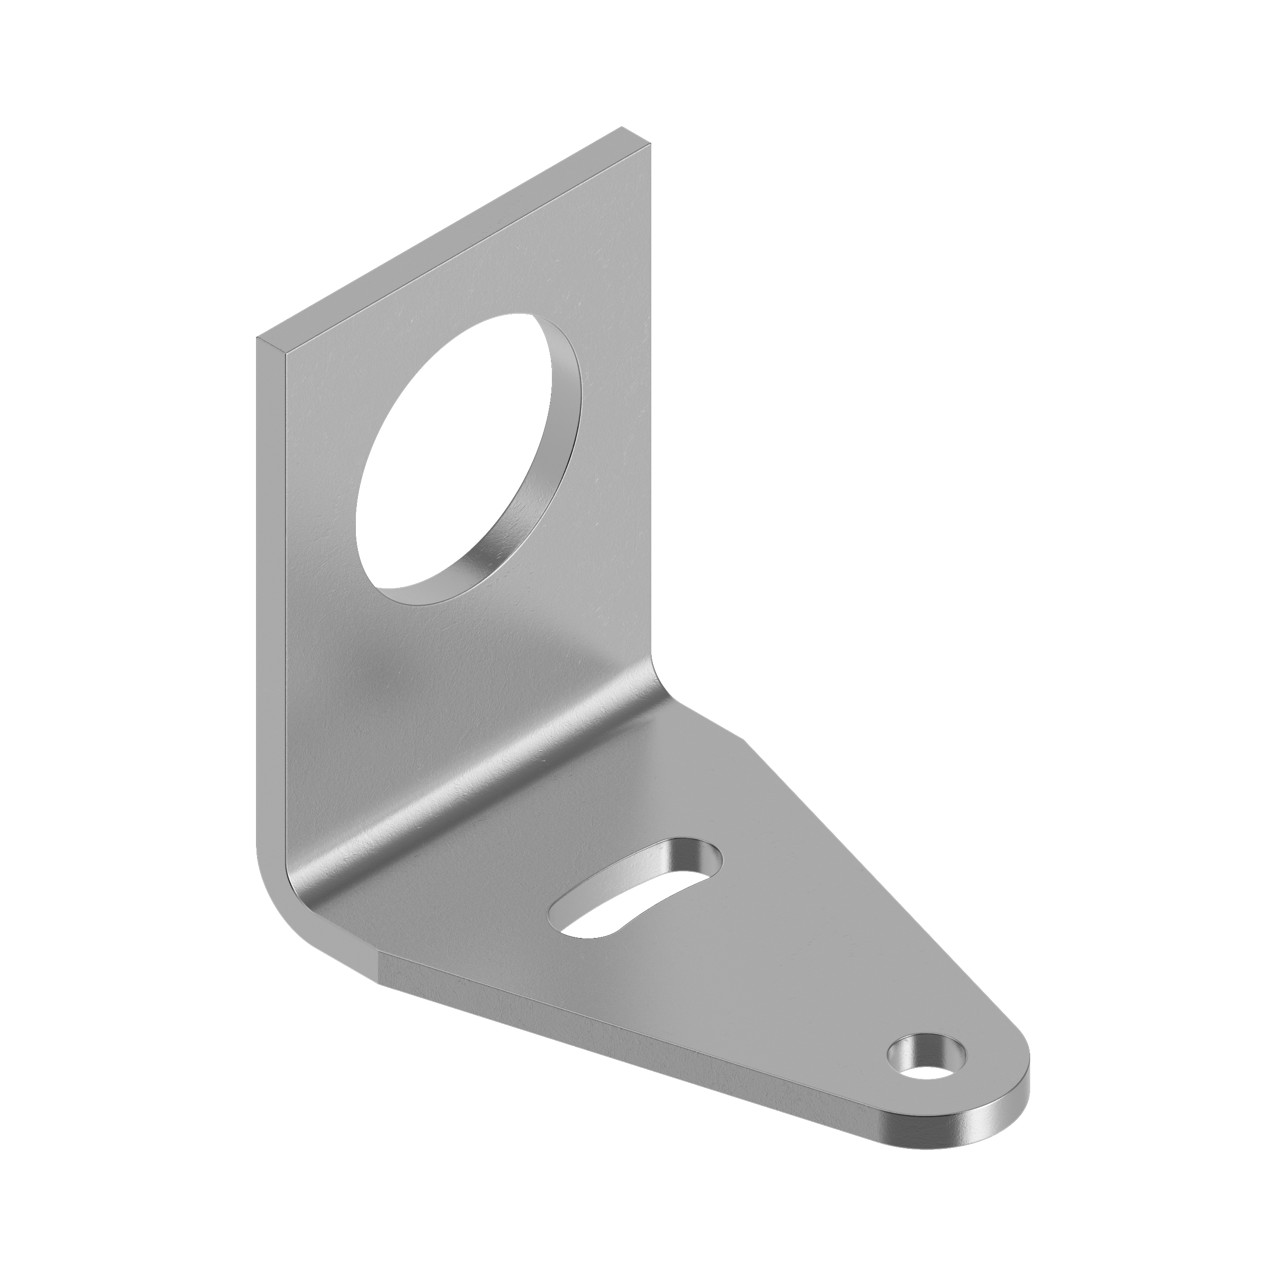 Image SMB18A - Bracket: 18 mm Right-Angle-mount; Material: 11 Gauge Stainless Steel; Curved mounting slot for versatility/orientation; Clearance for M4 #8 h